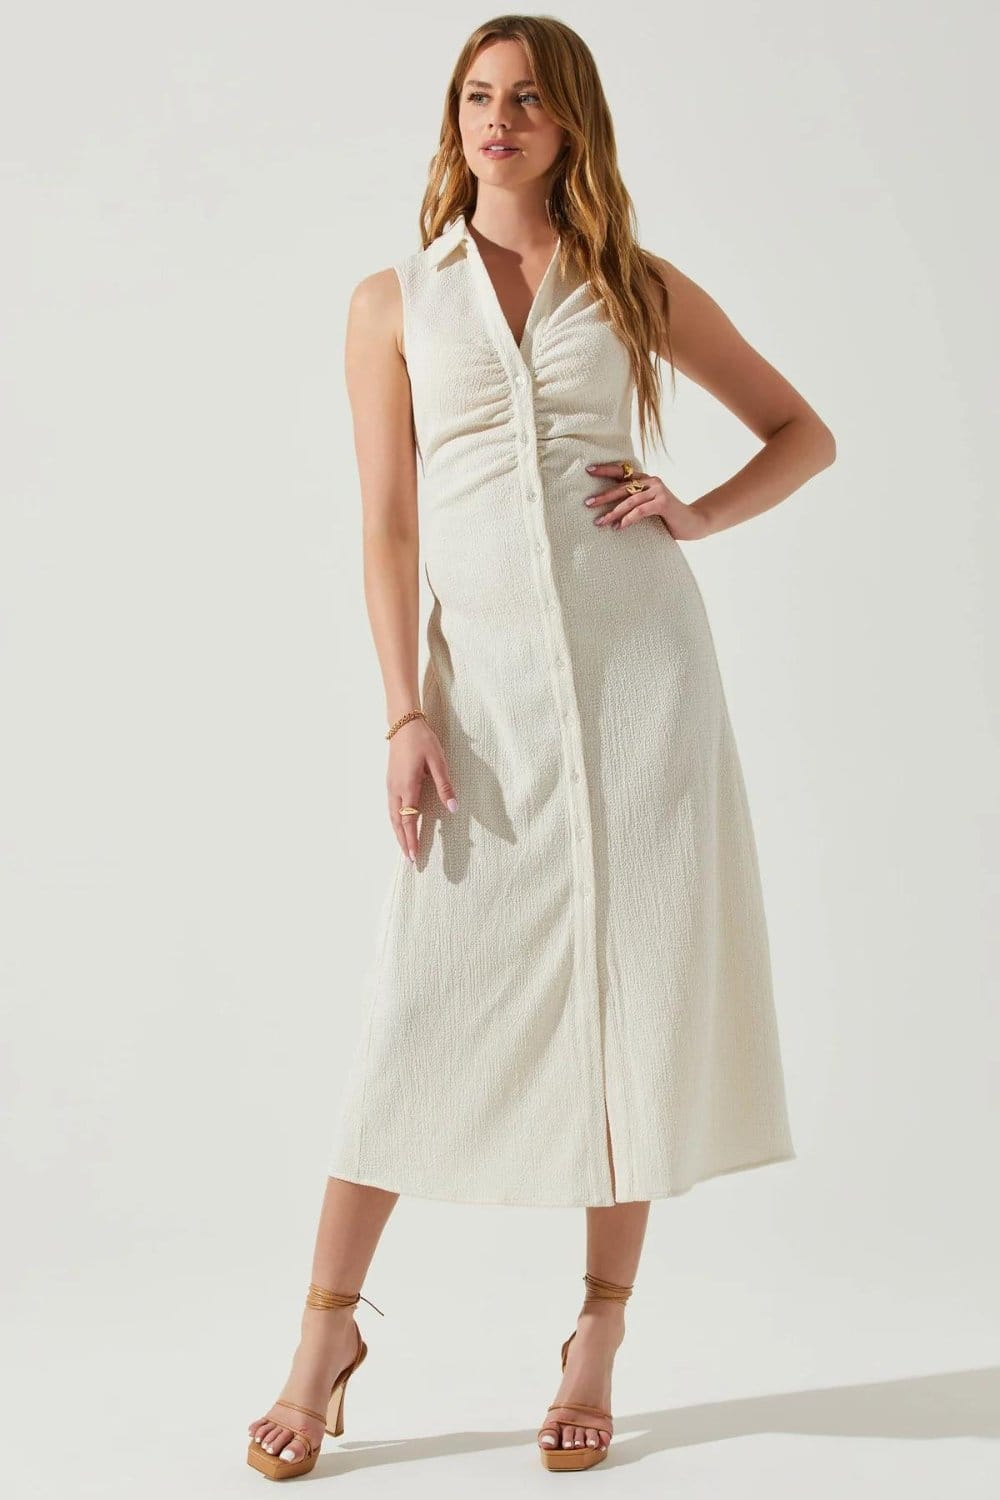 Astr The Label Shirt Dress with Ruched details